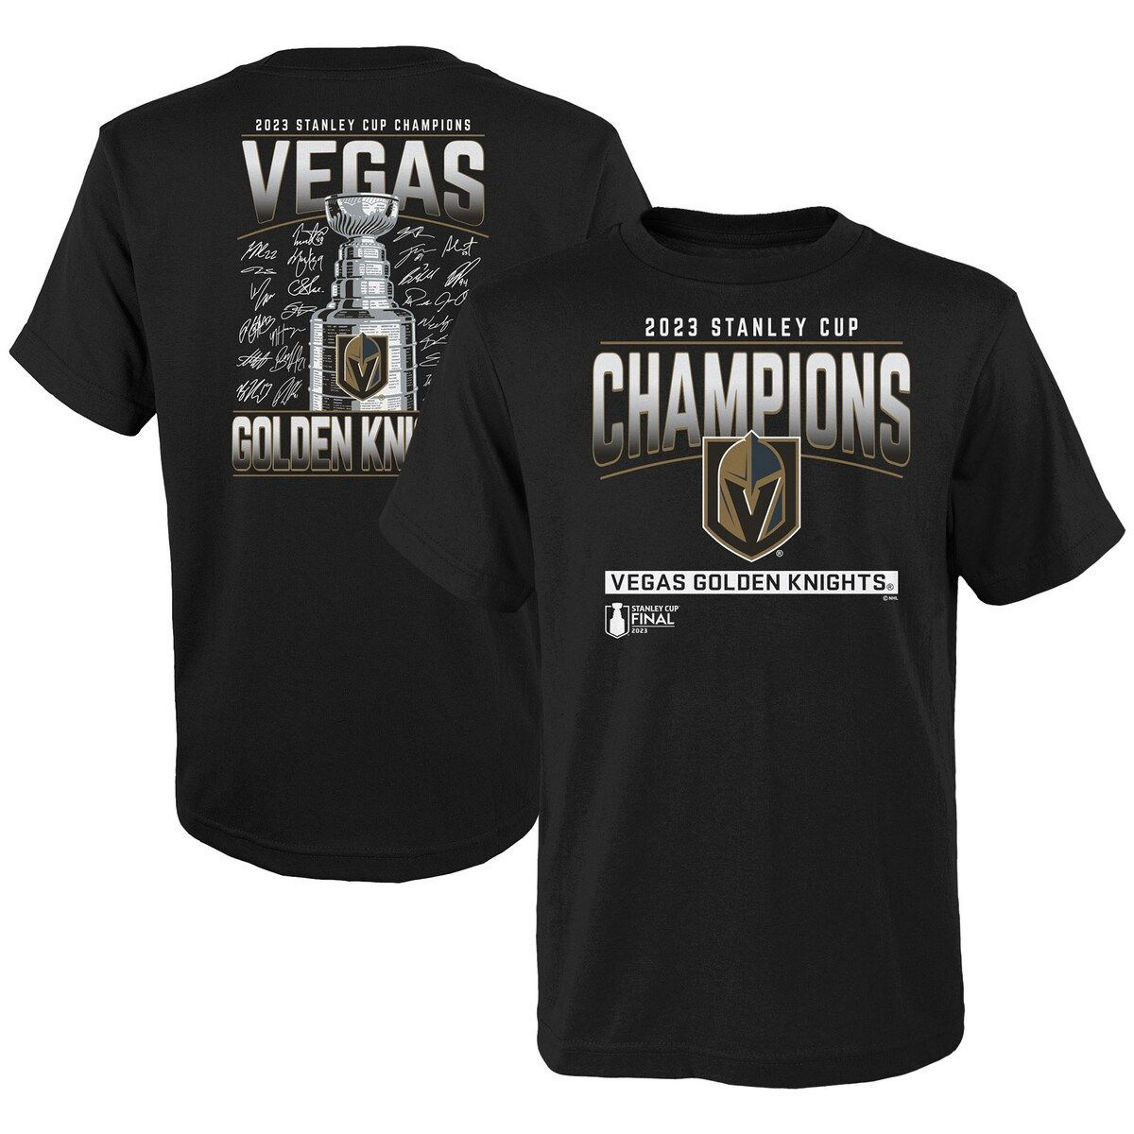 Fanatics Branded Youth Black Vegas Golden Knights 2023 Stanley Cup s Signature Roster T-Shirt